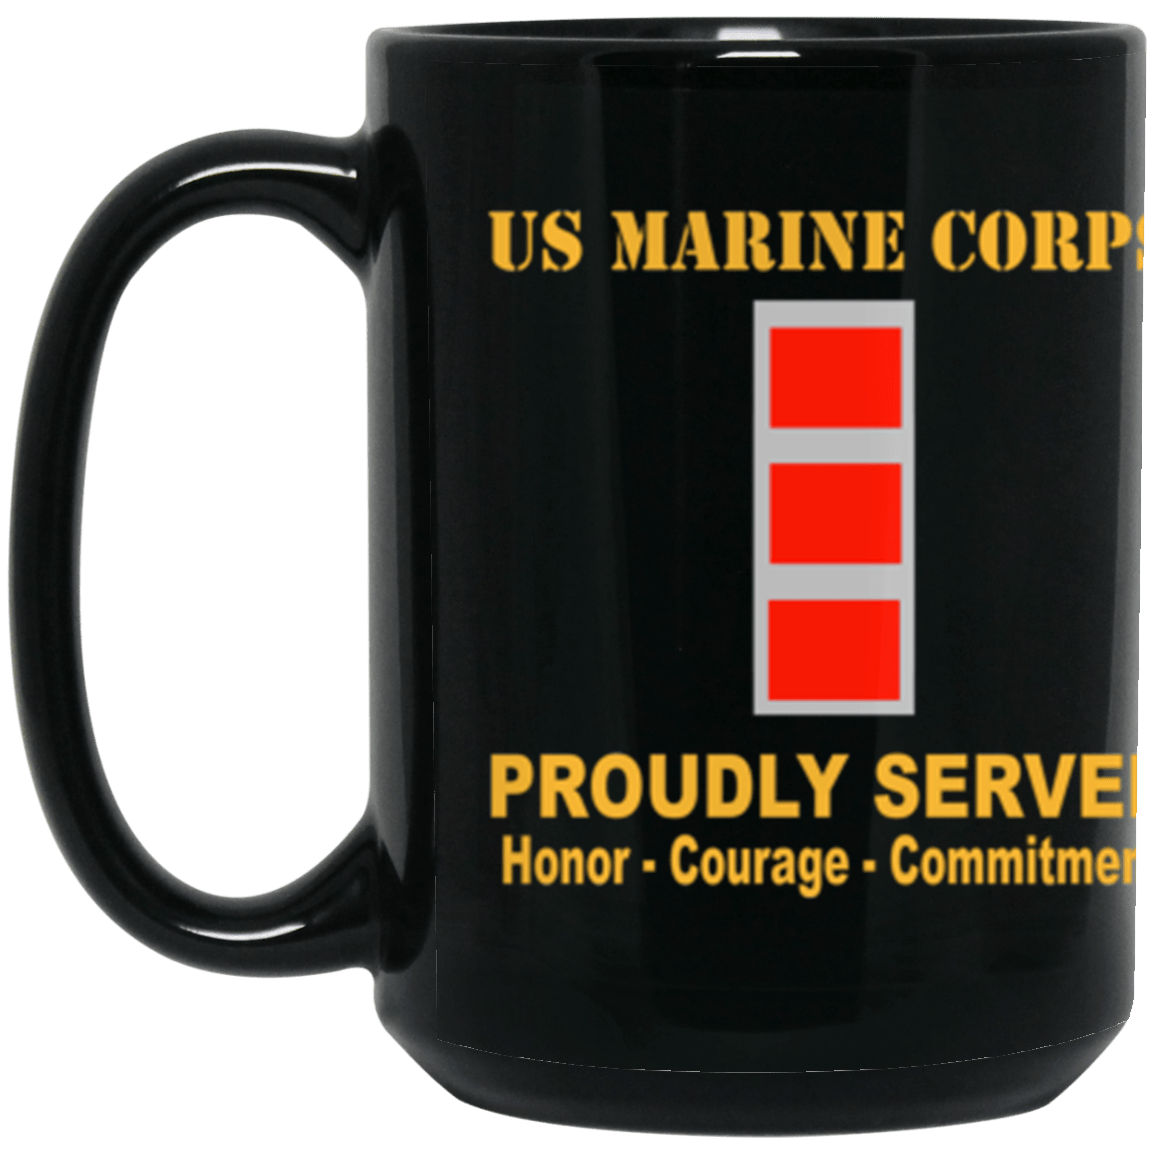 USMC W-4 Chief Warrant Officer 4 CW4 CW4 Warrant Officer Ranks Proudly Served Core Values 15 oz. Black Mug